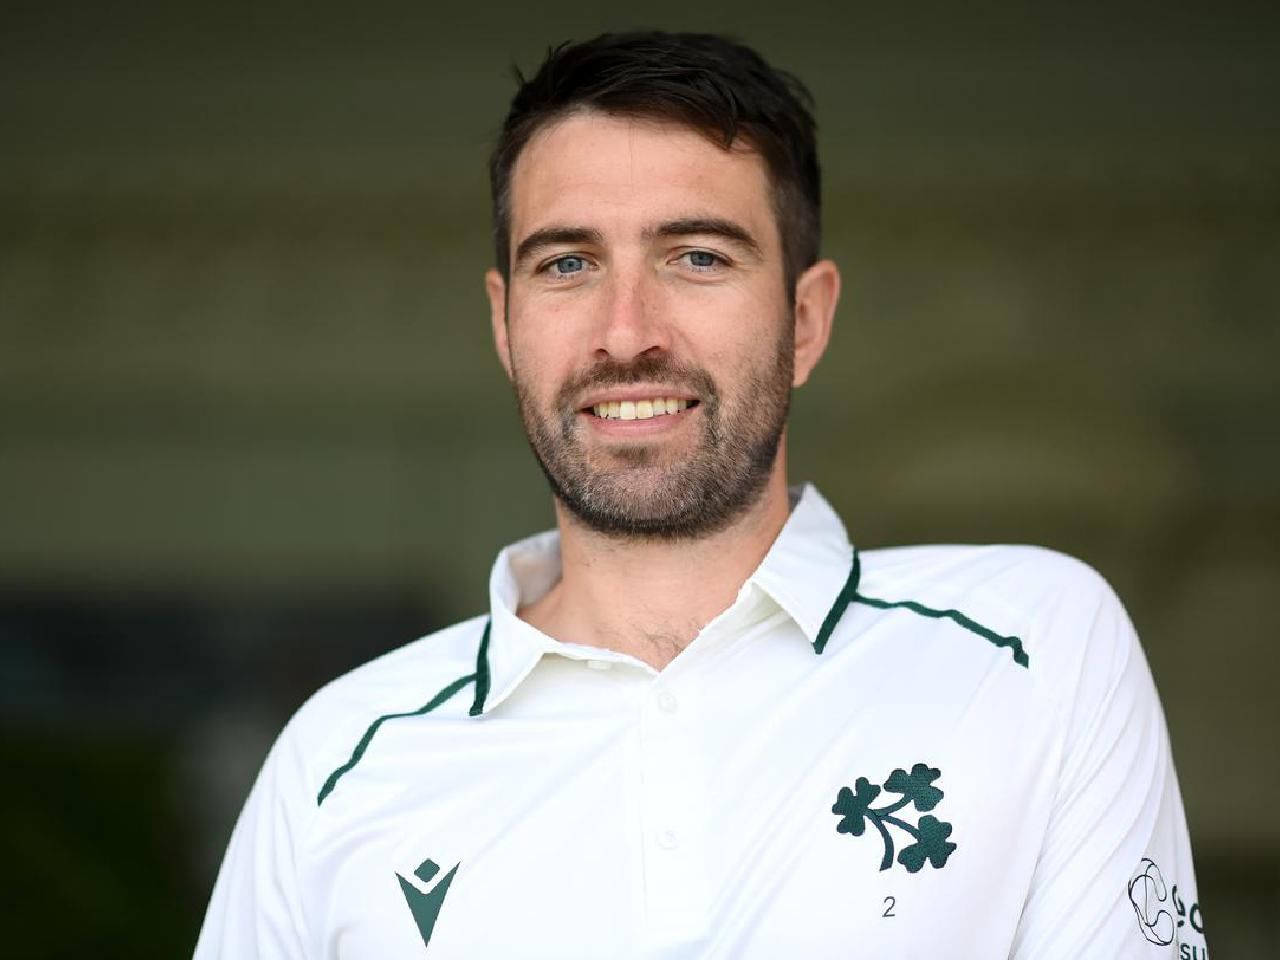 Winning against England would be high for Irish cricket, says Andrew Balbirnie ahead of the one-off Test match against England